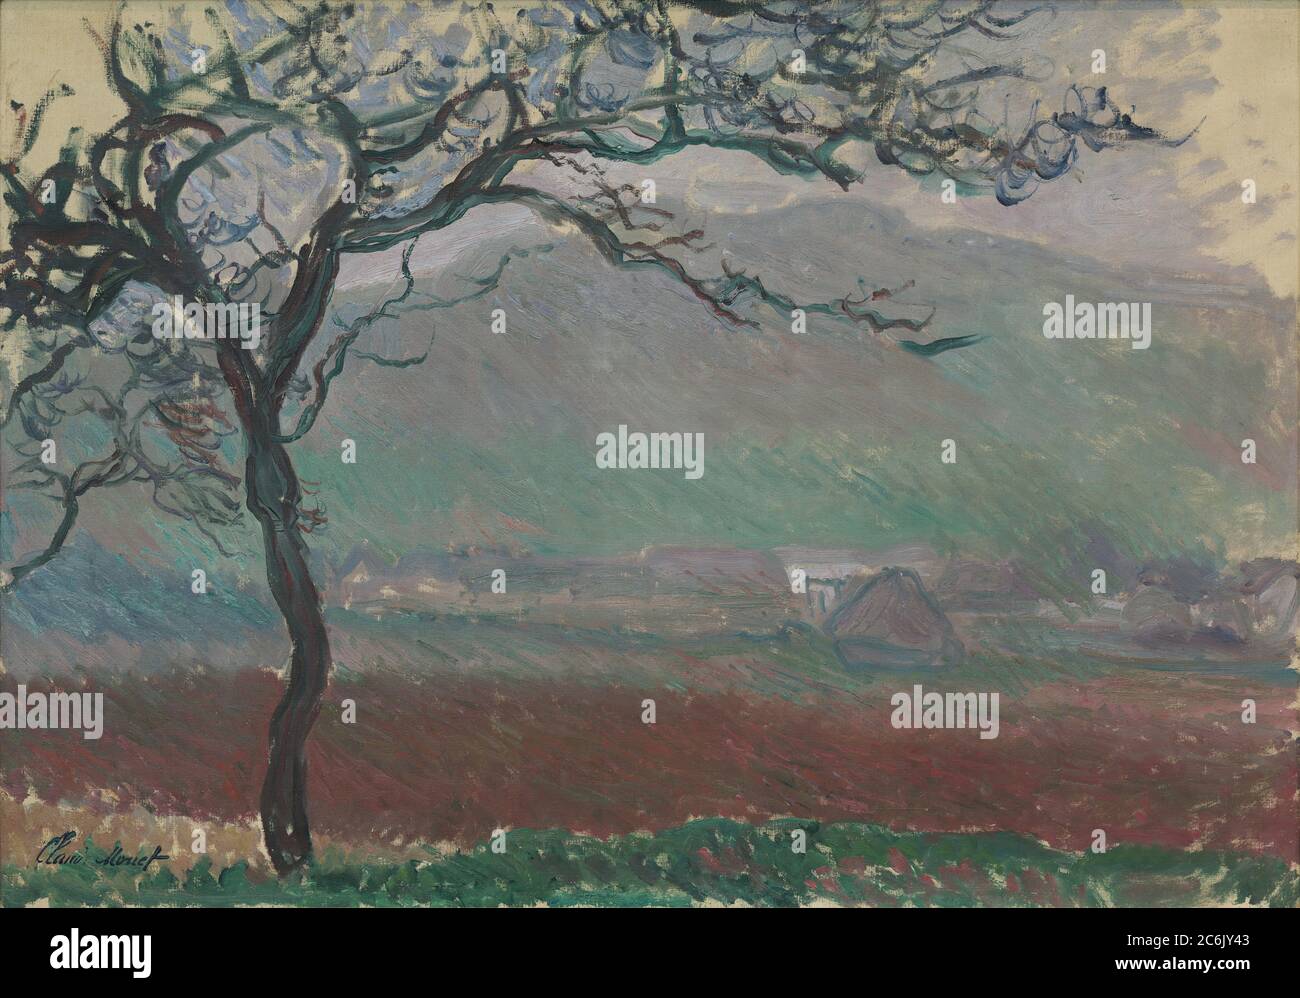 Oil painting from the famous master impressionist painter Claude Monet. Stock Photo